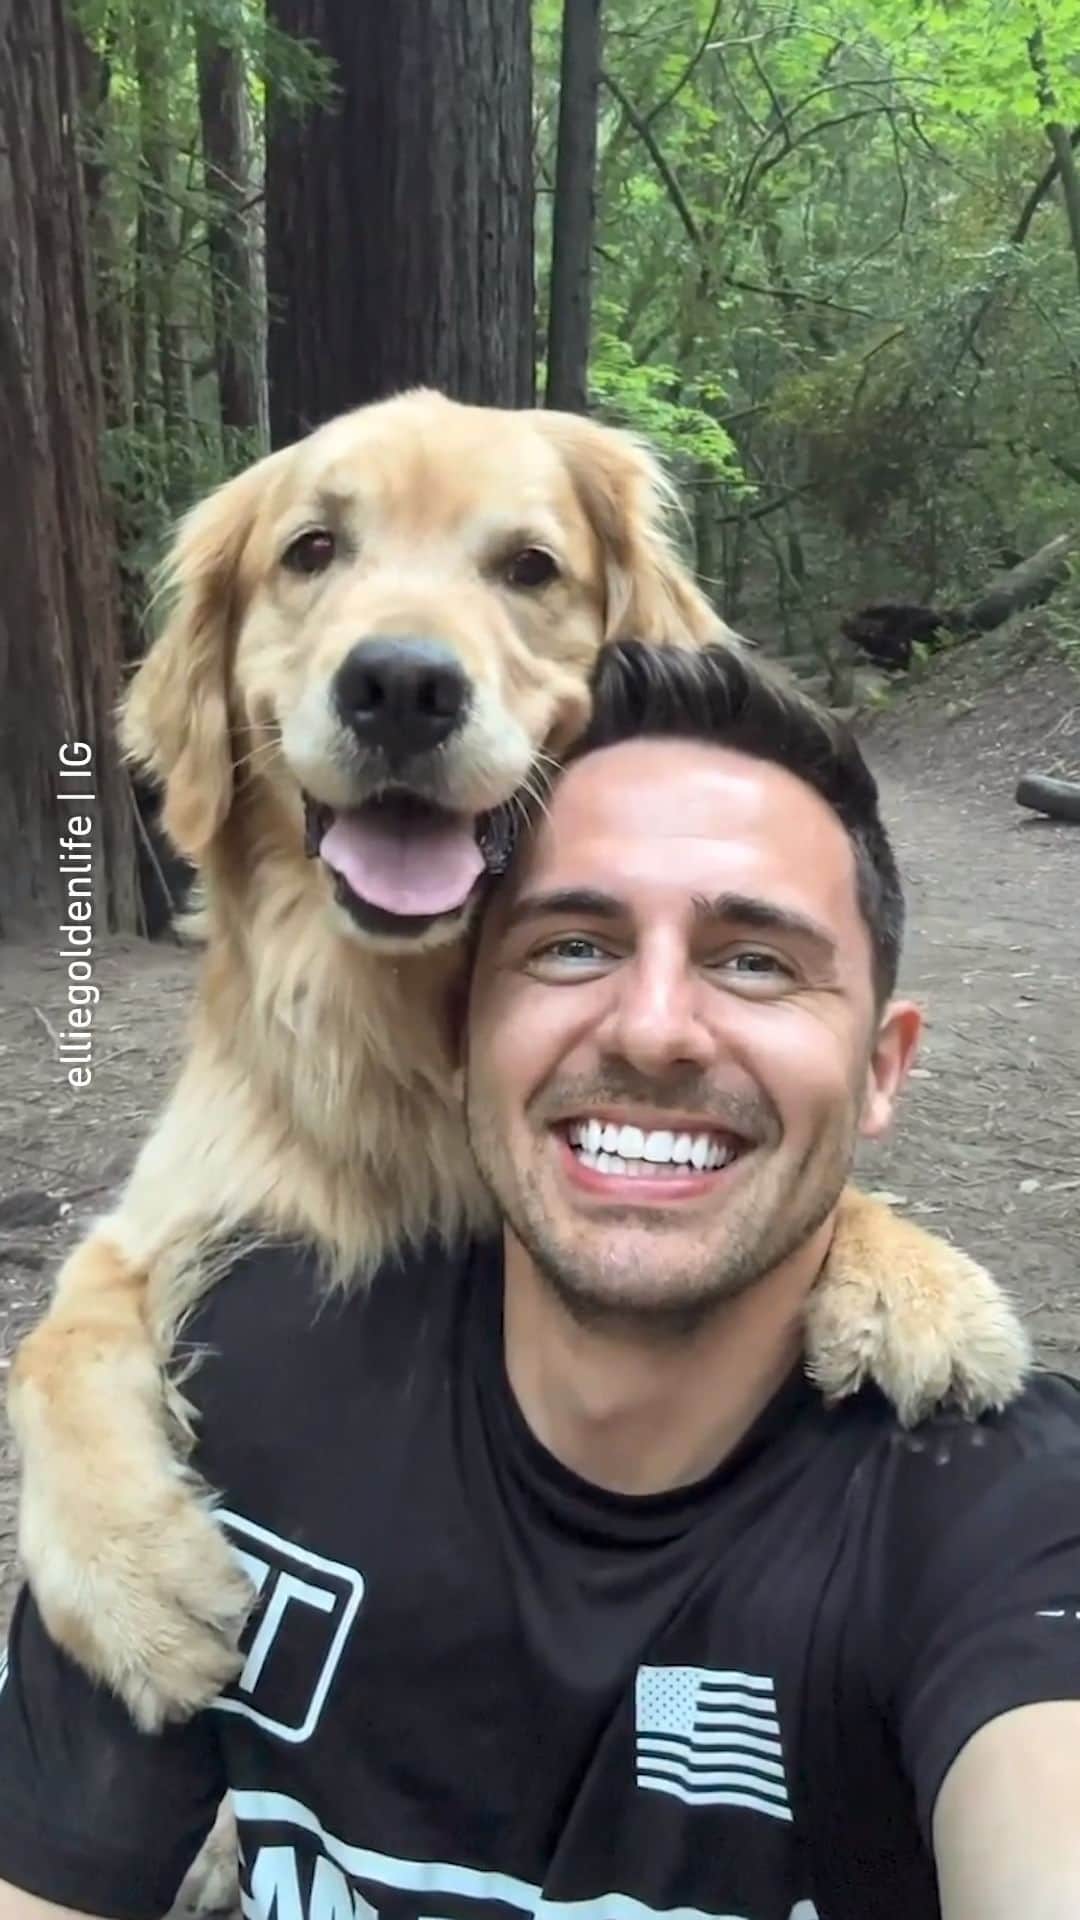 8crapのインスタグラム：「Smile for #SelfieSaturday ! 😁 📹 @elliegoldenlife - Hashtag #barkedselfie on your doggo’s selfies and get a chance to be featured! - #barked #🤳 #Selfie #DogSelfie #dog #doggo #GoldenRetriever」